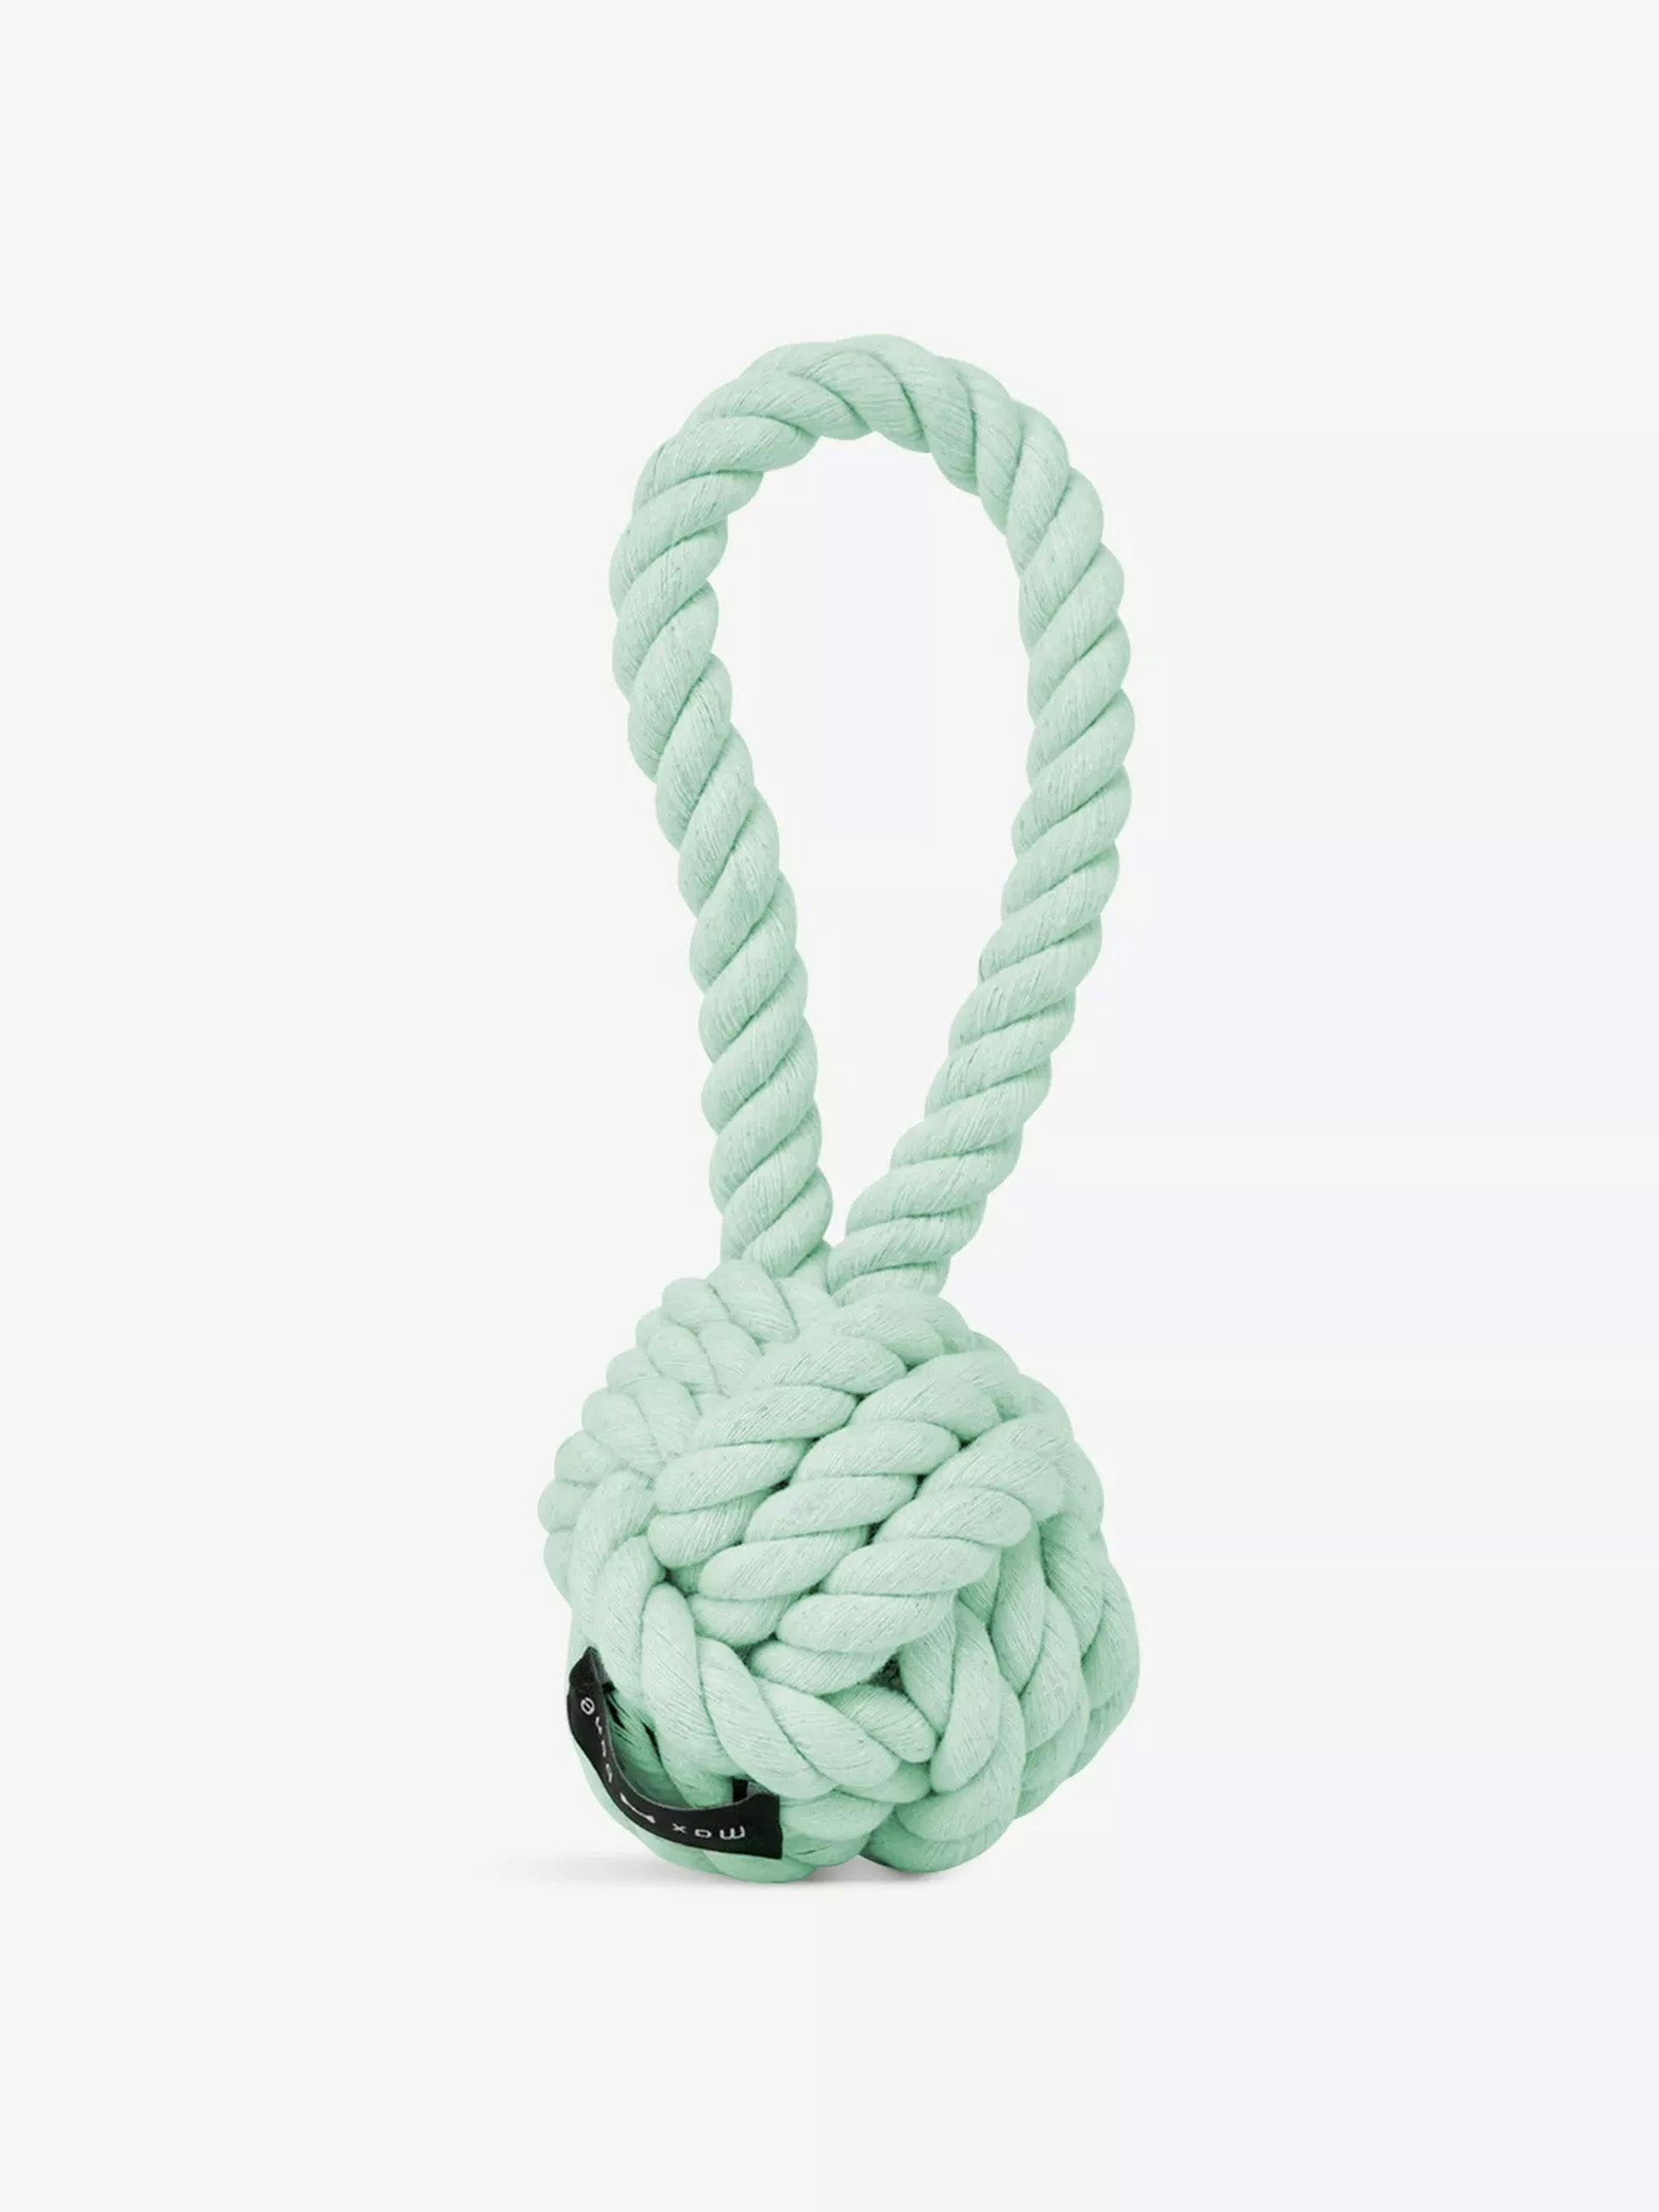 Twisted rope dog toy